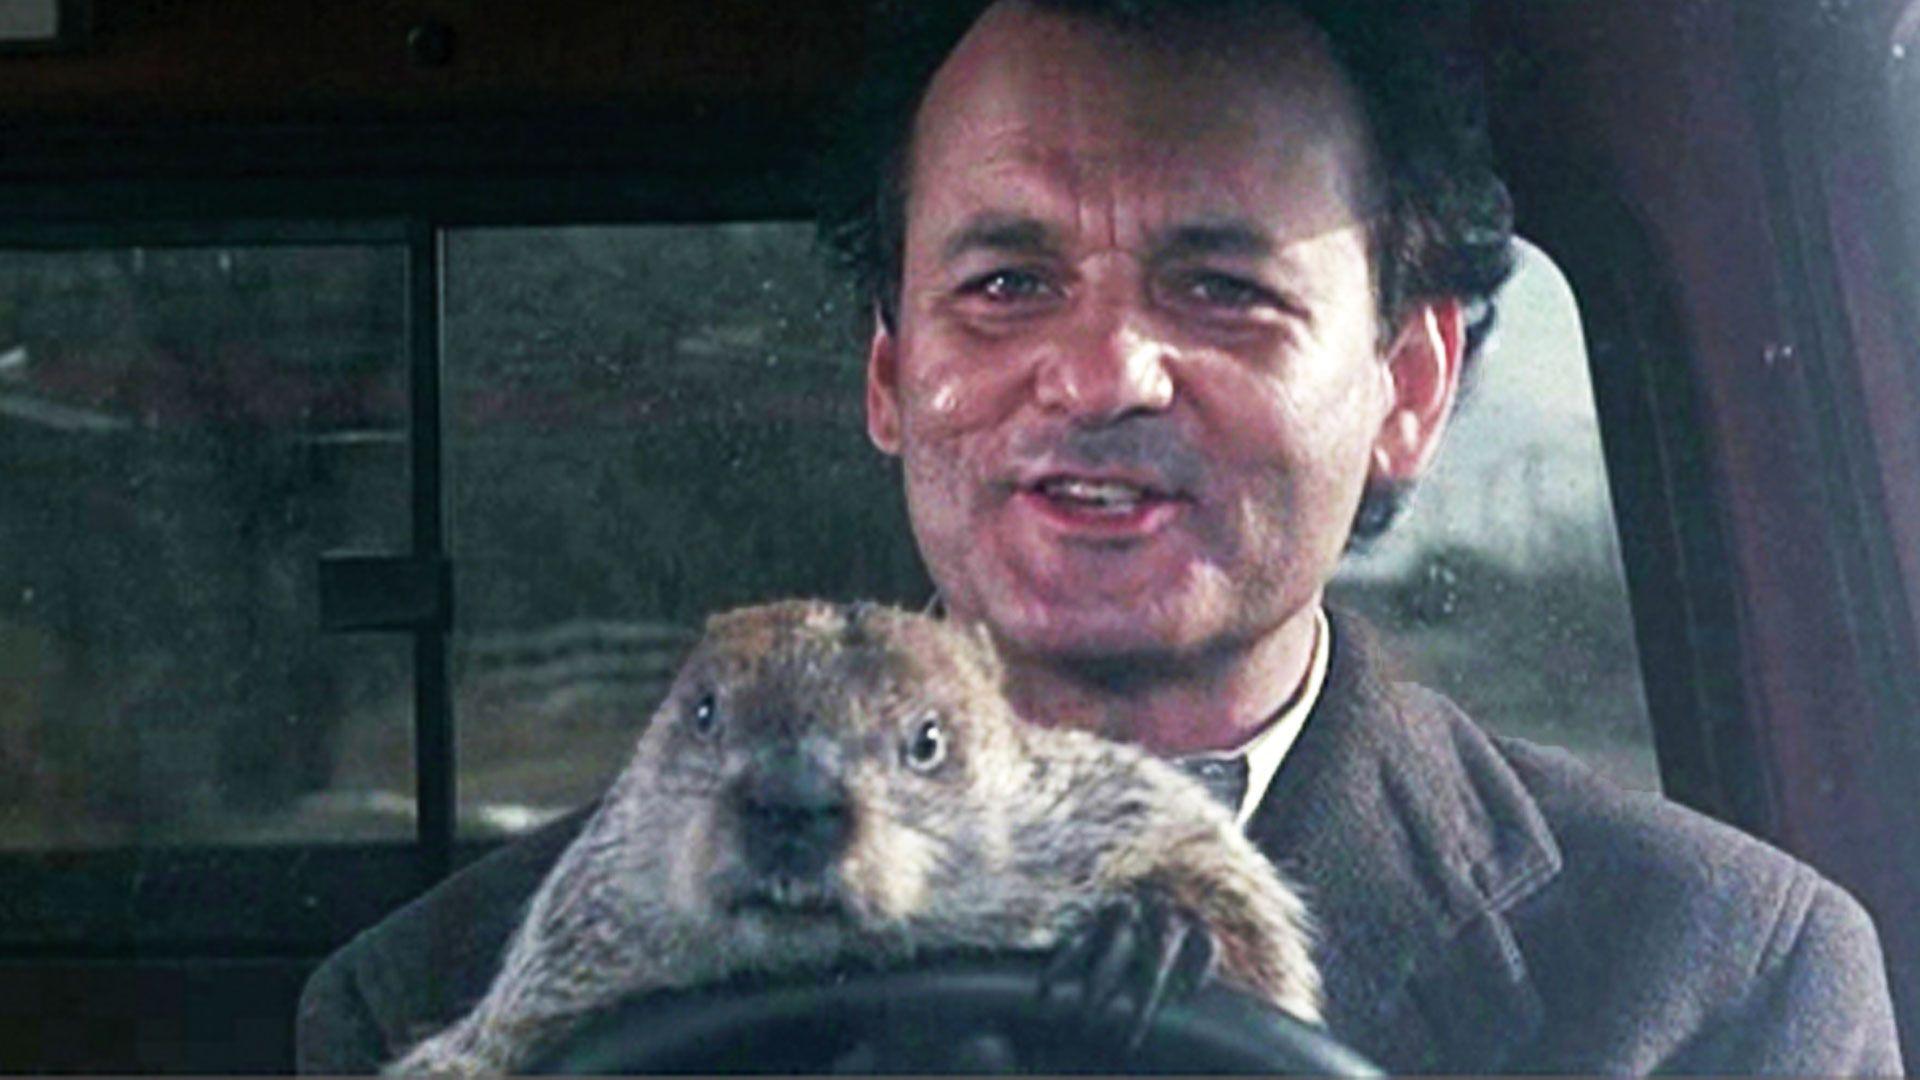 It's Groundhog Day! Here's 7 expressive animals that all look a